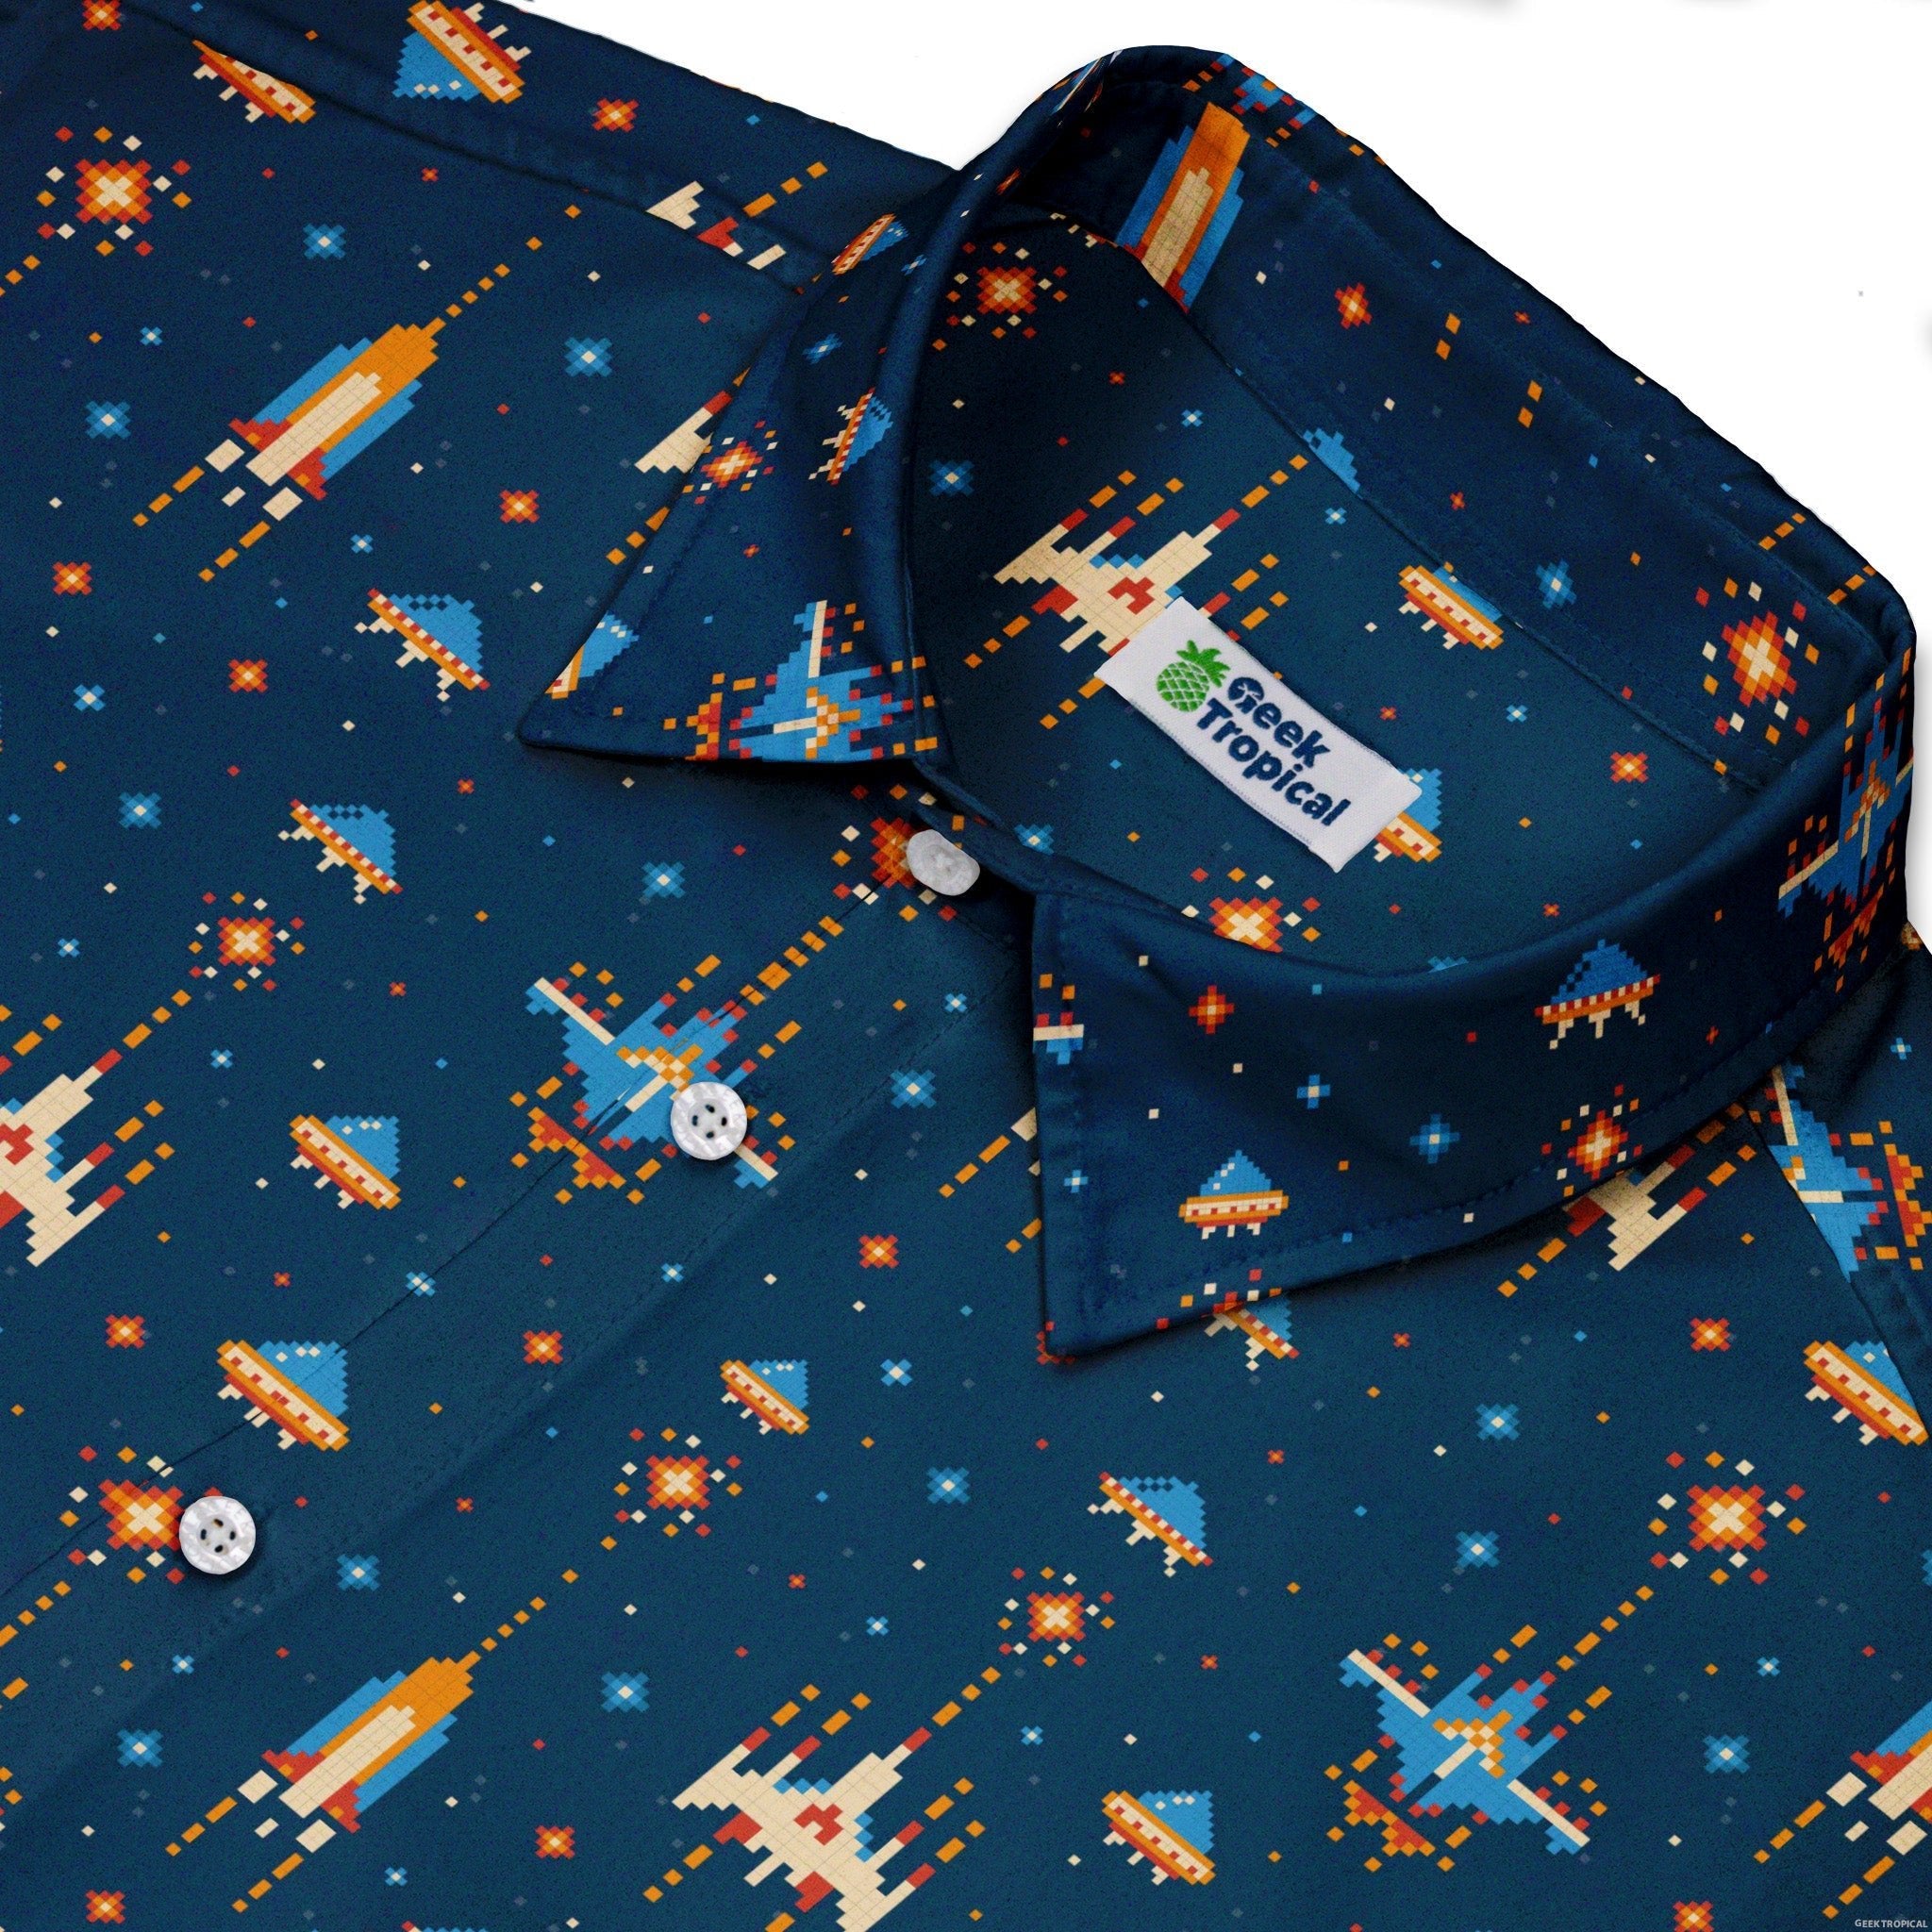 Space Retro Arcade Button Up Shirt - adult sizing - outer space & astronaut print - video game arcade print